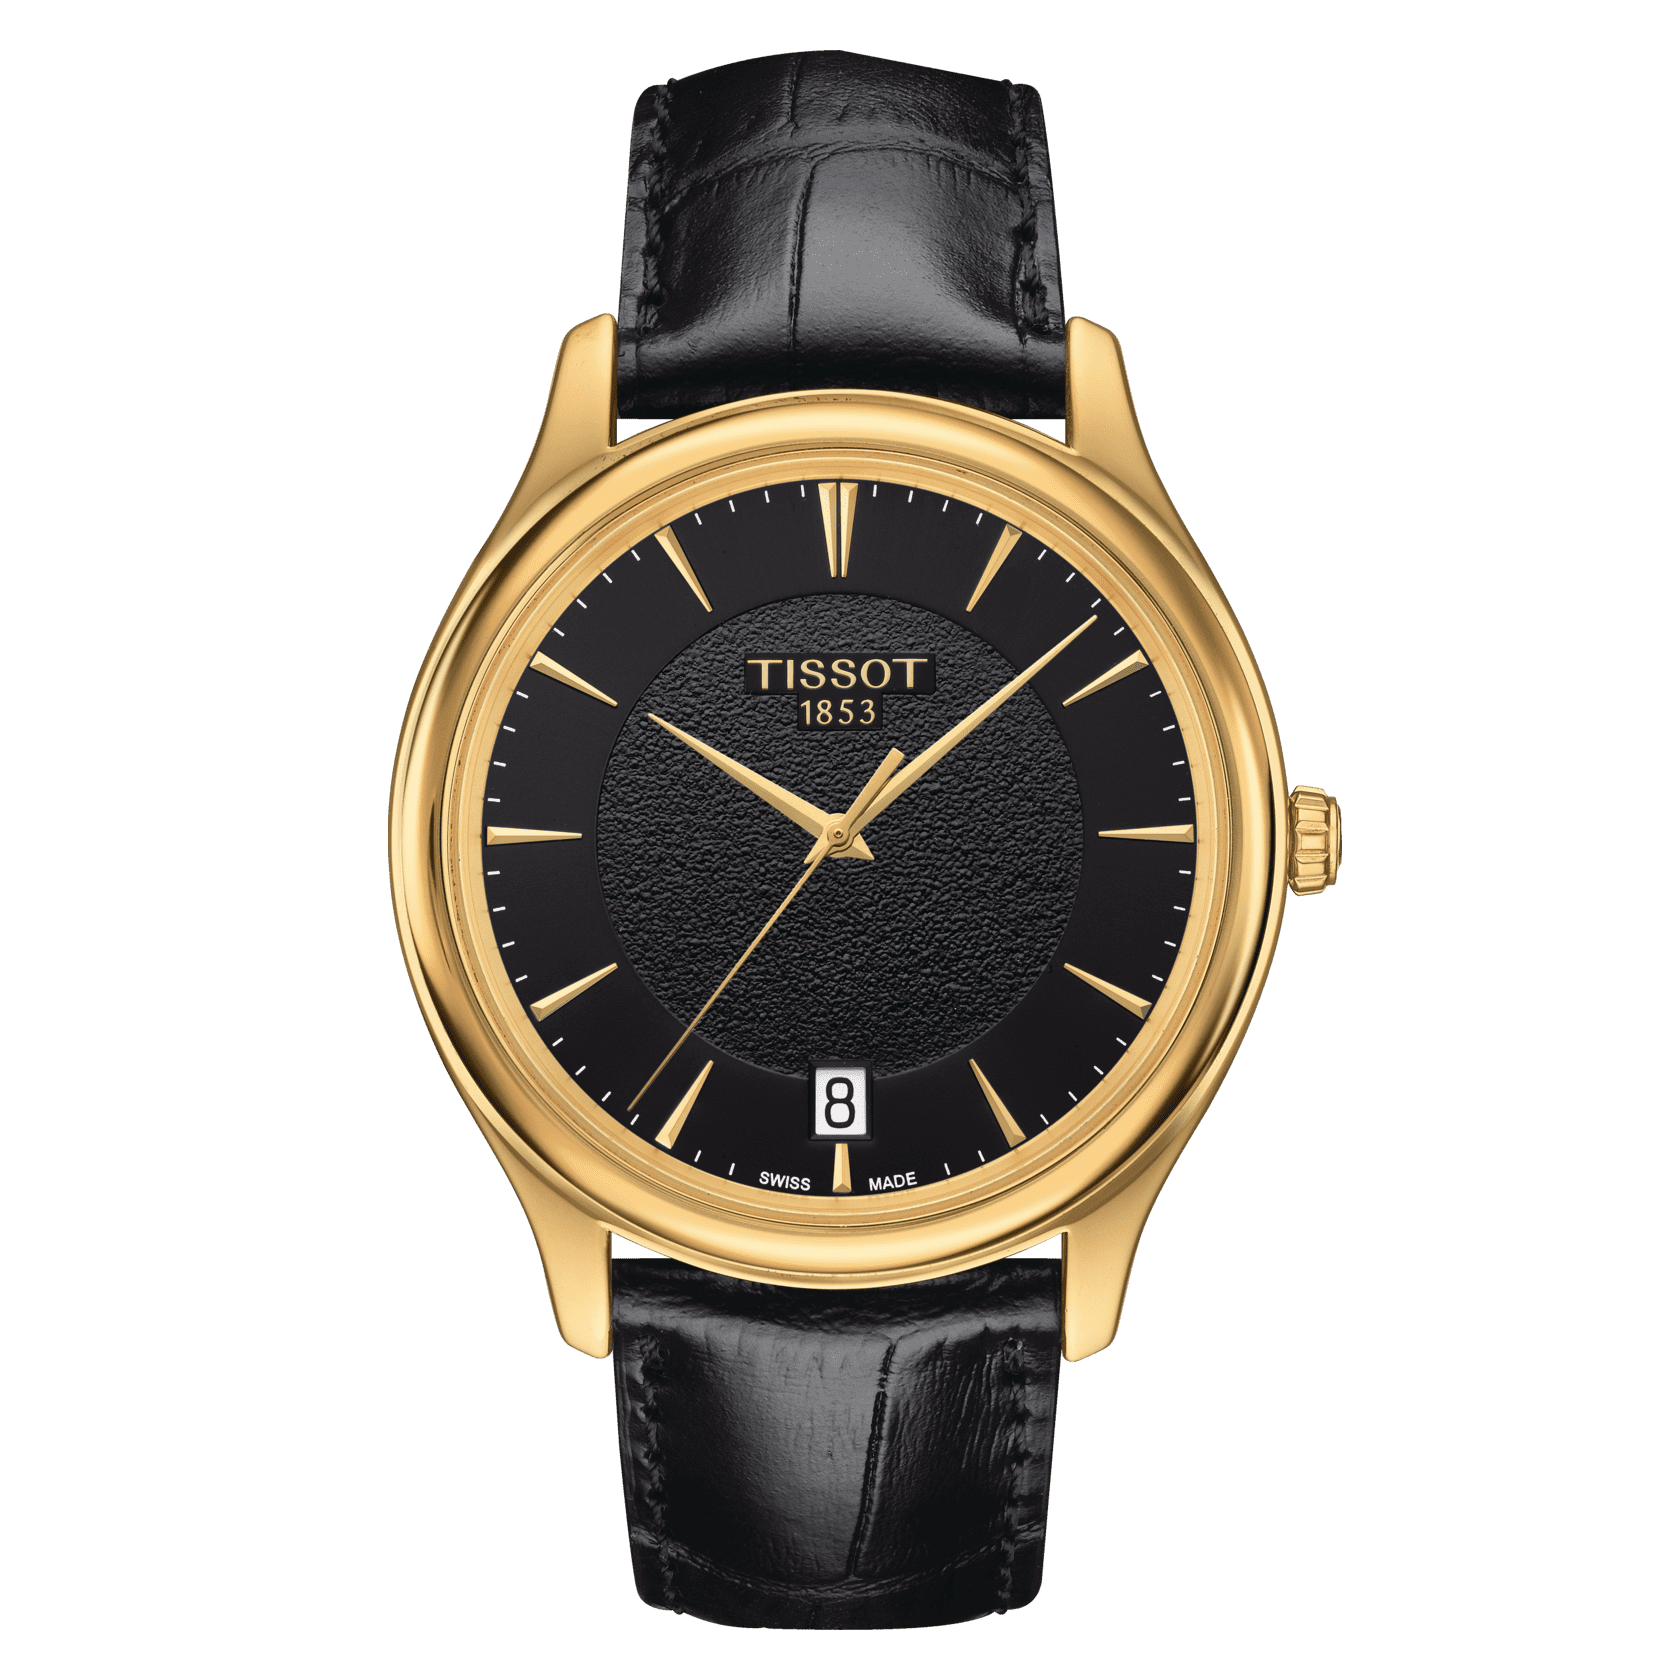 Who Sells Replica Bretling Watches